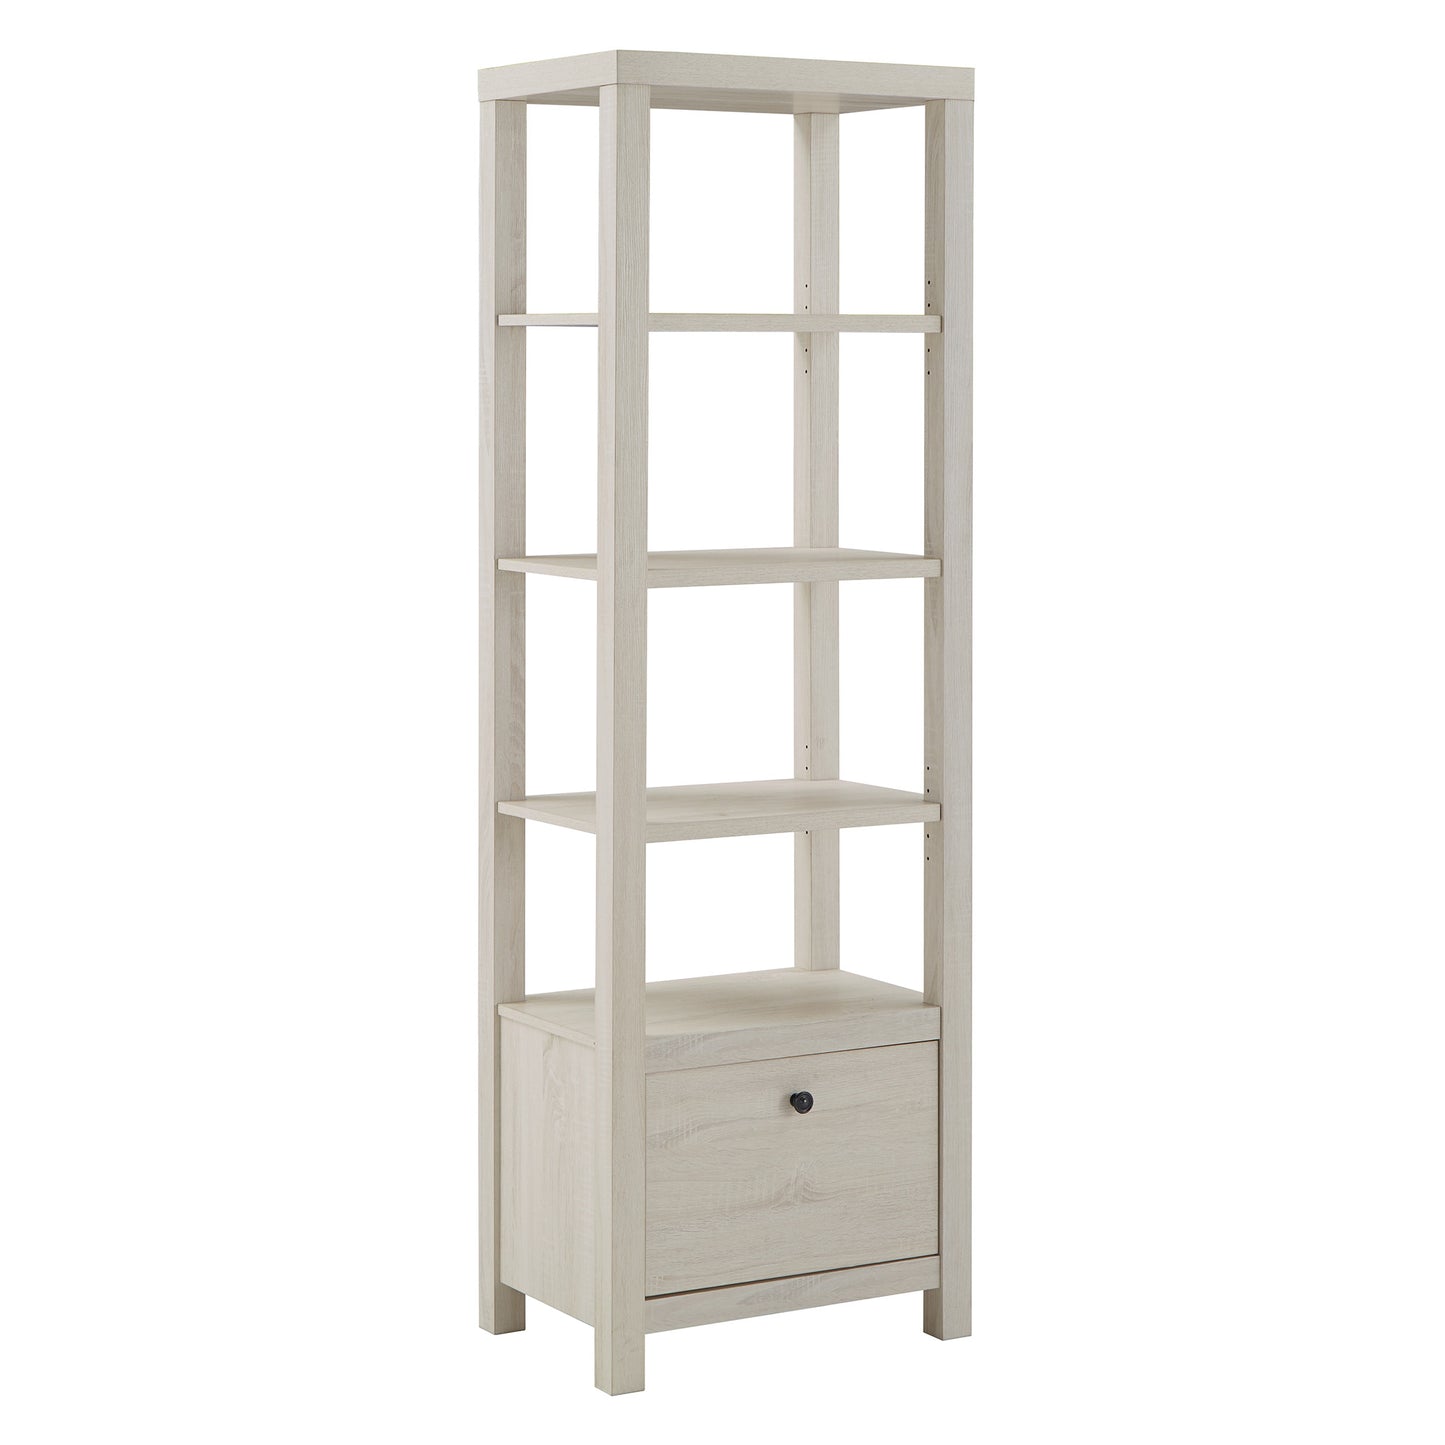 4-tier/5-tier Adjustable Bookshelf with Drawer - Antique White Finish